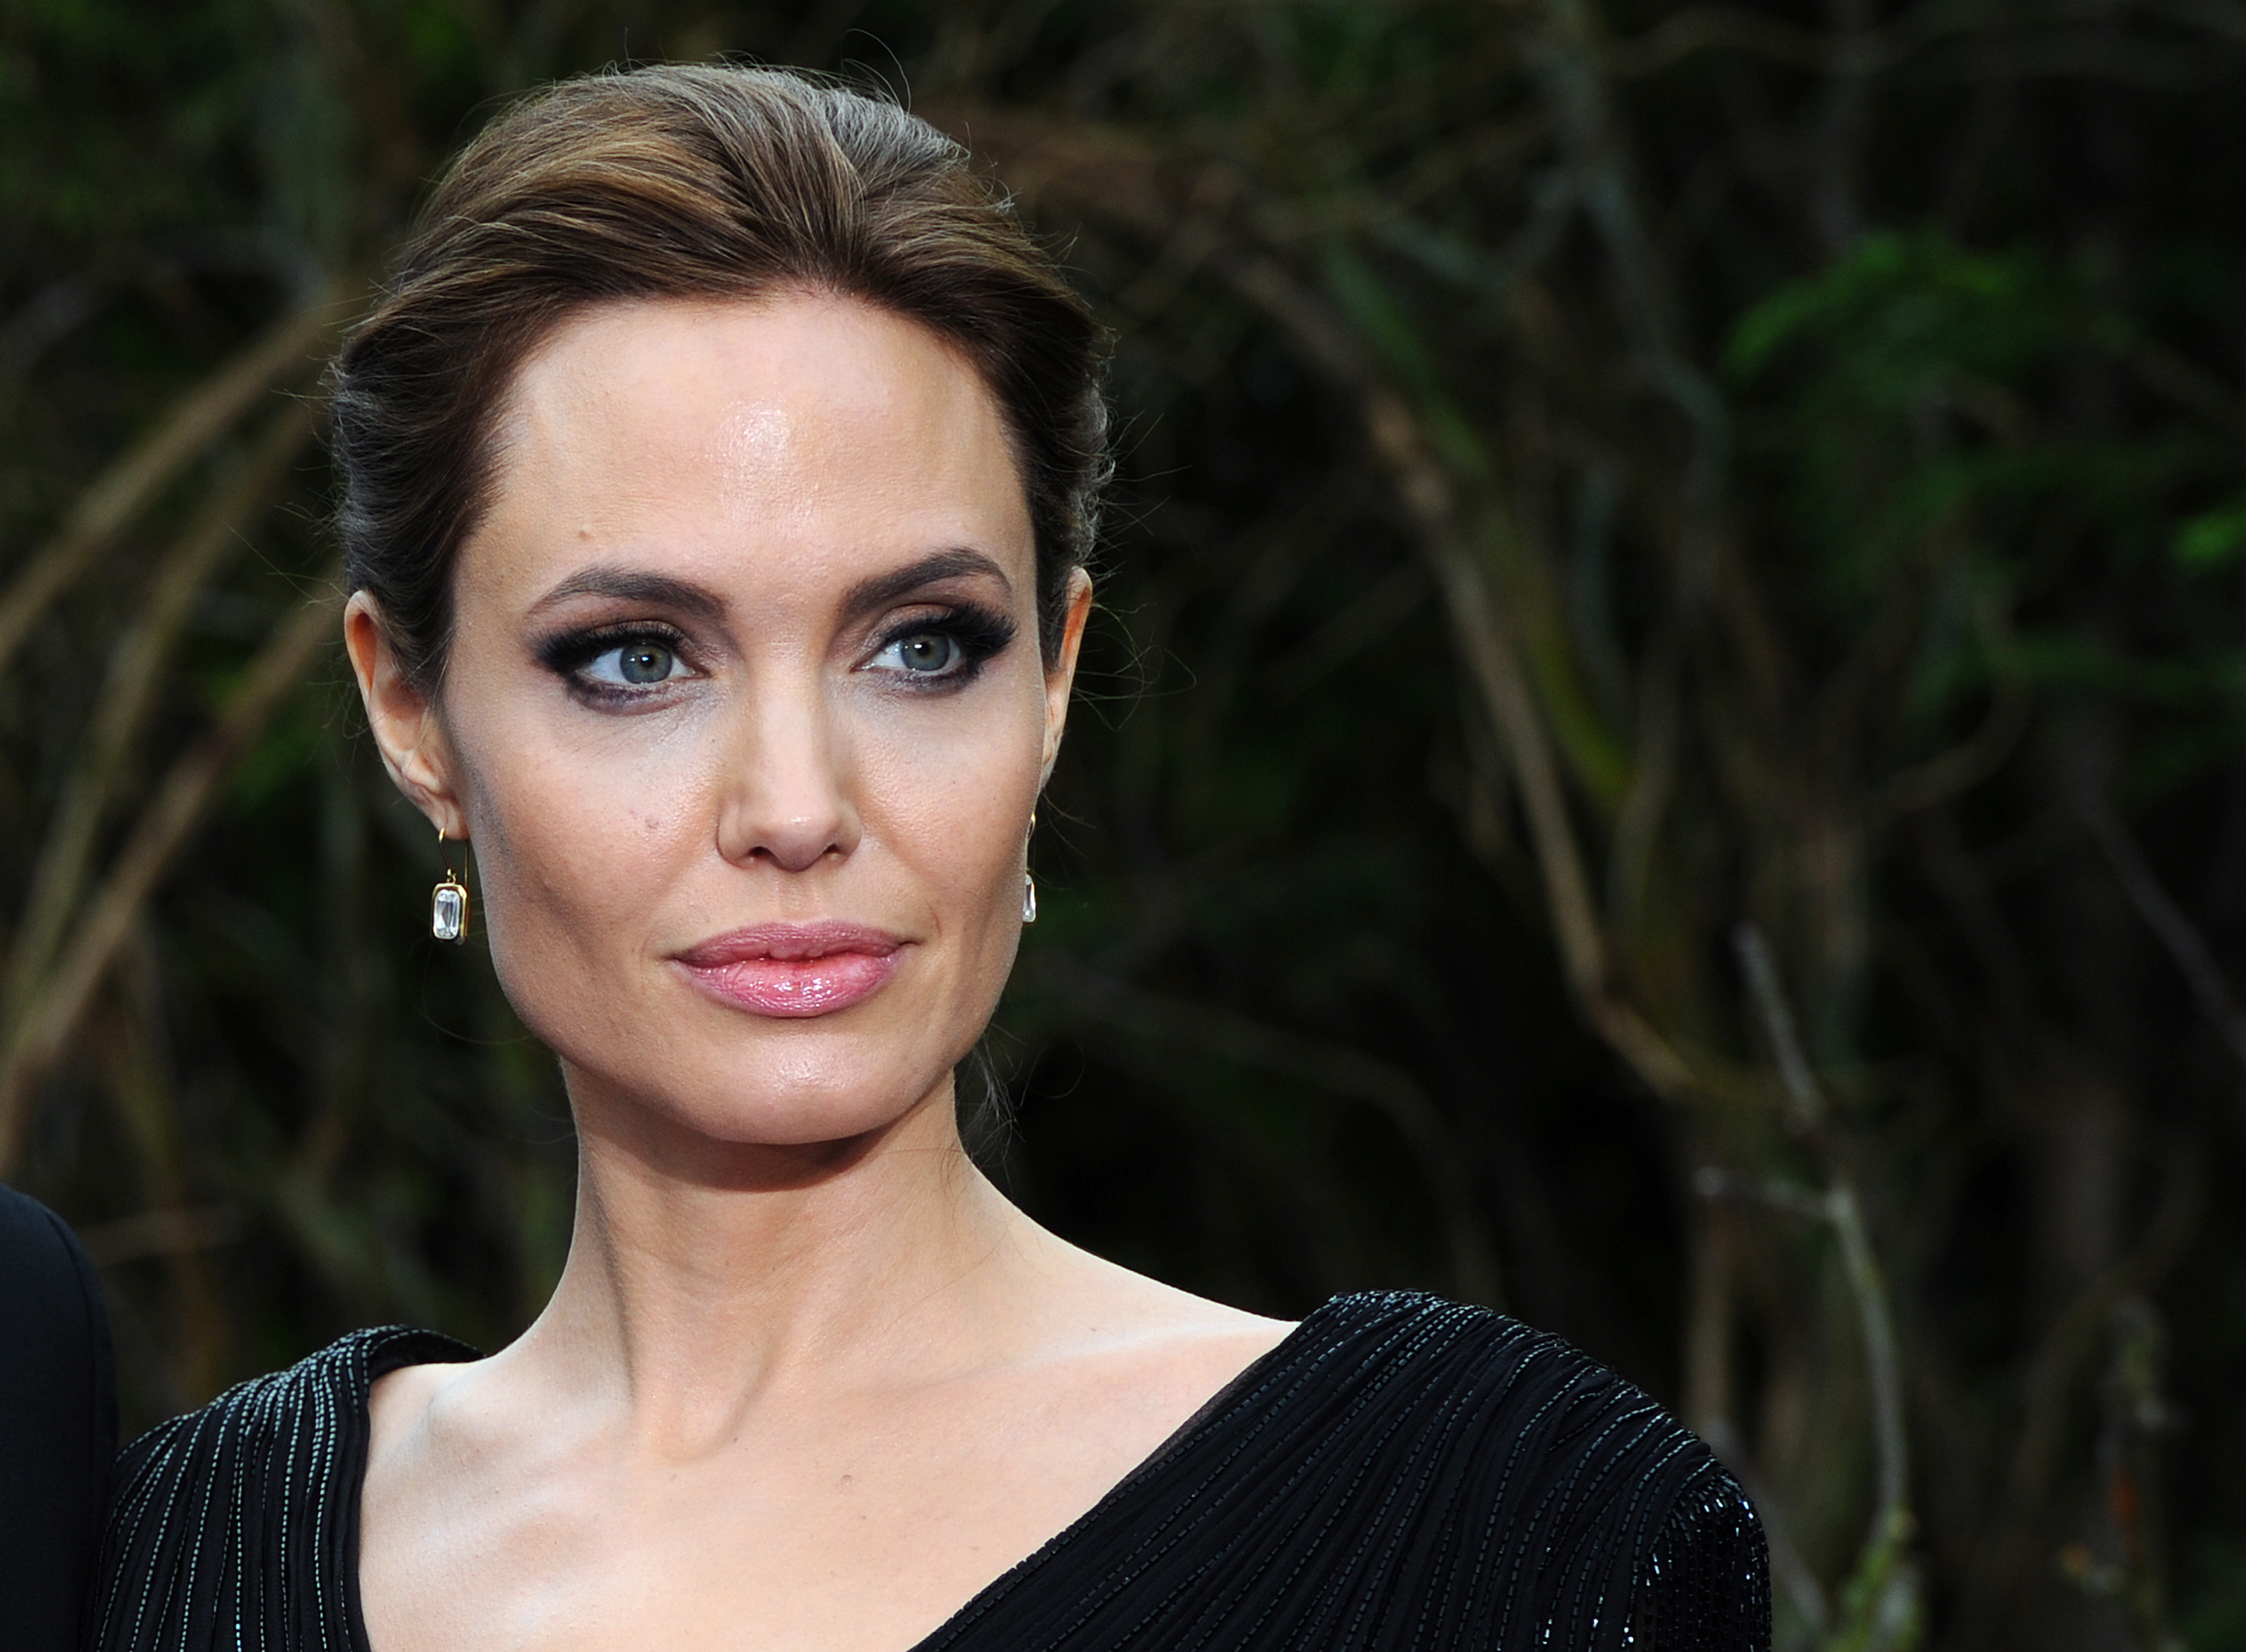 Angelina Jolie at a private reception for Disney's "Maleficent" in support of Great Ormond Street Hospital at Kensington Palace on May 8, 2014, in London, England | Source: Getty Images